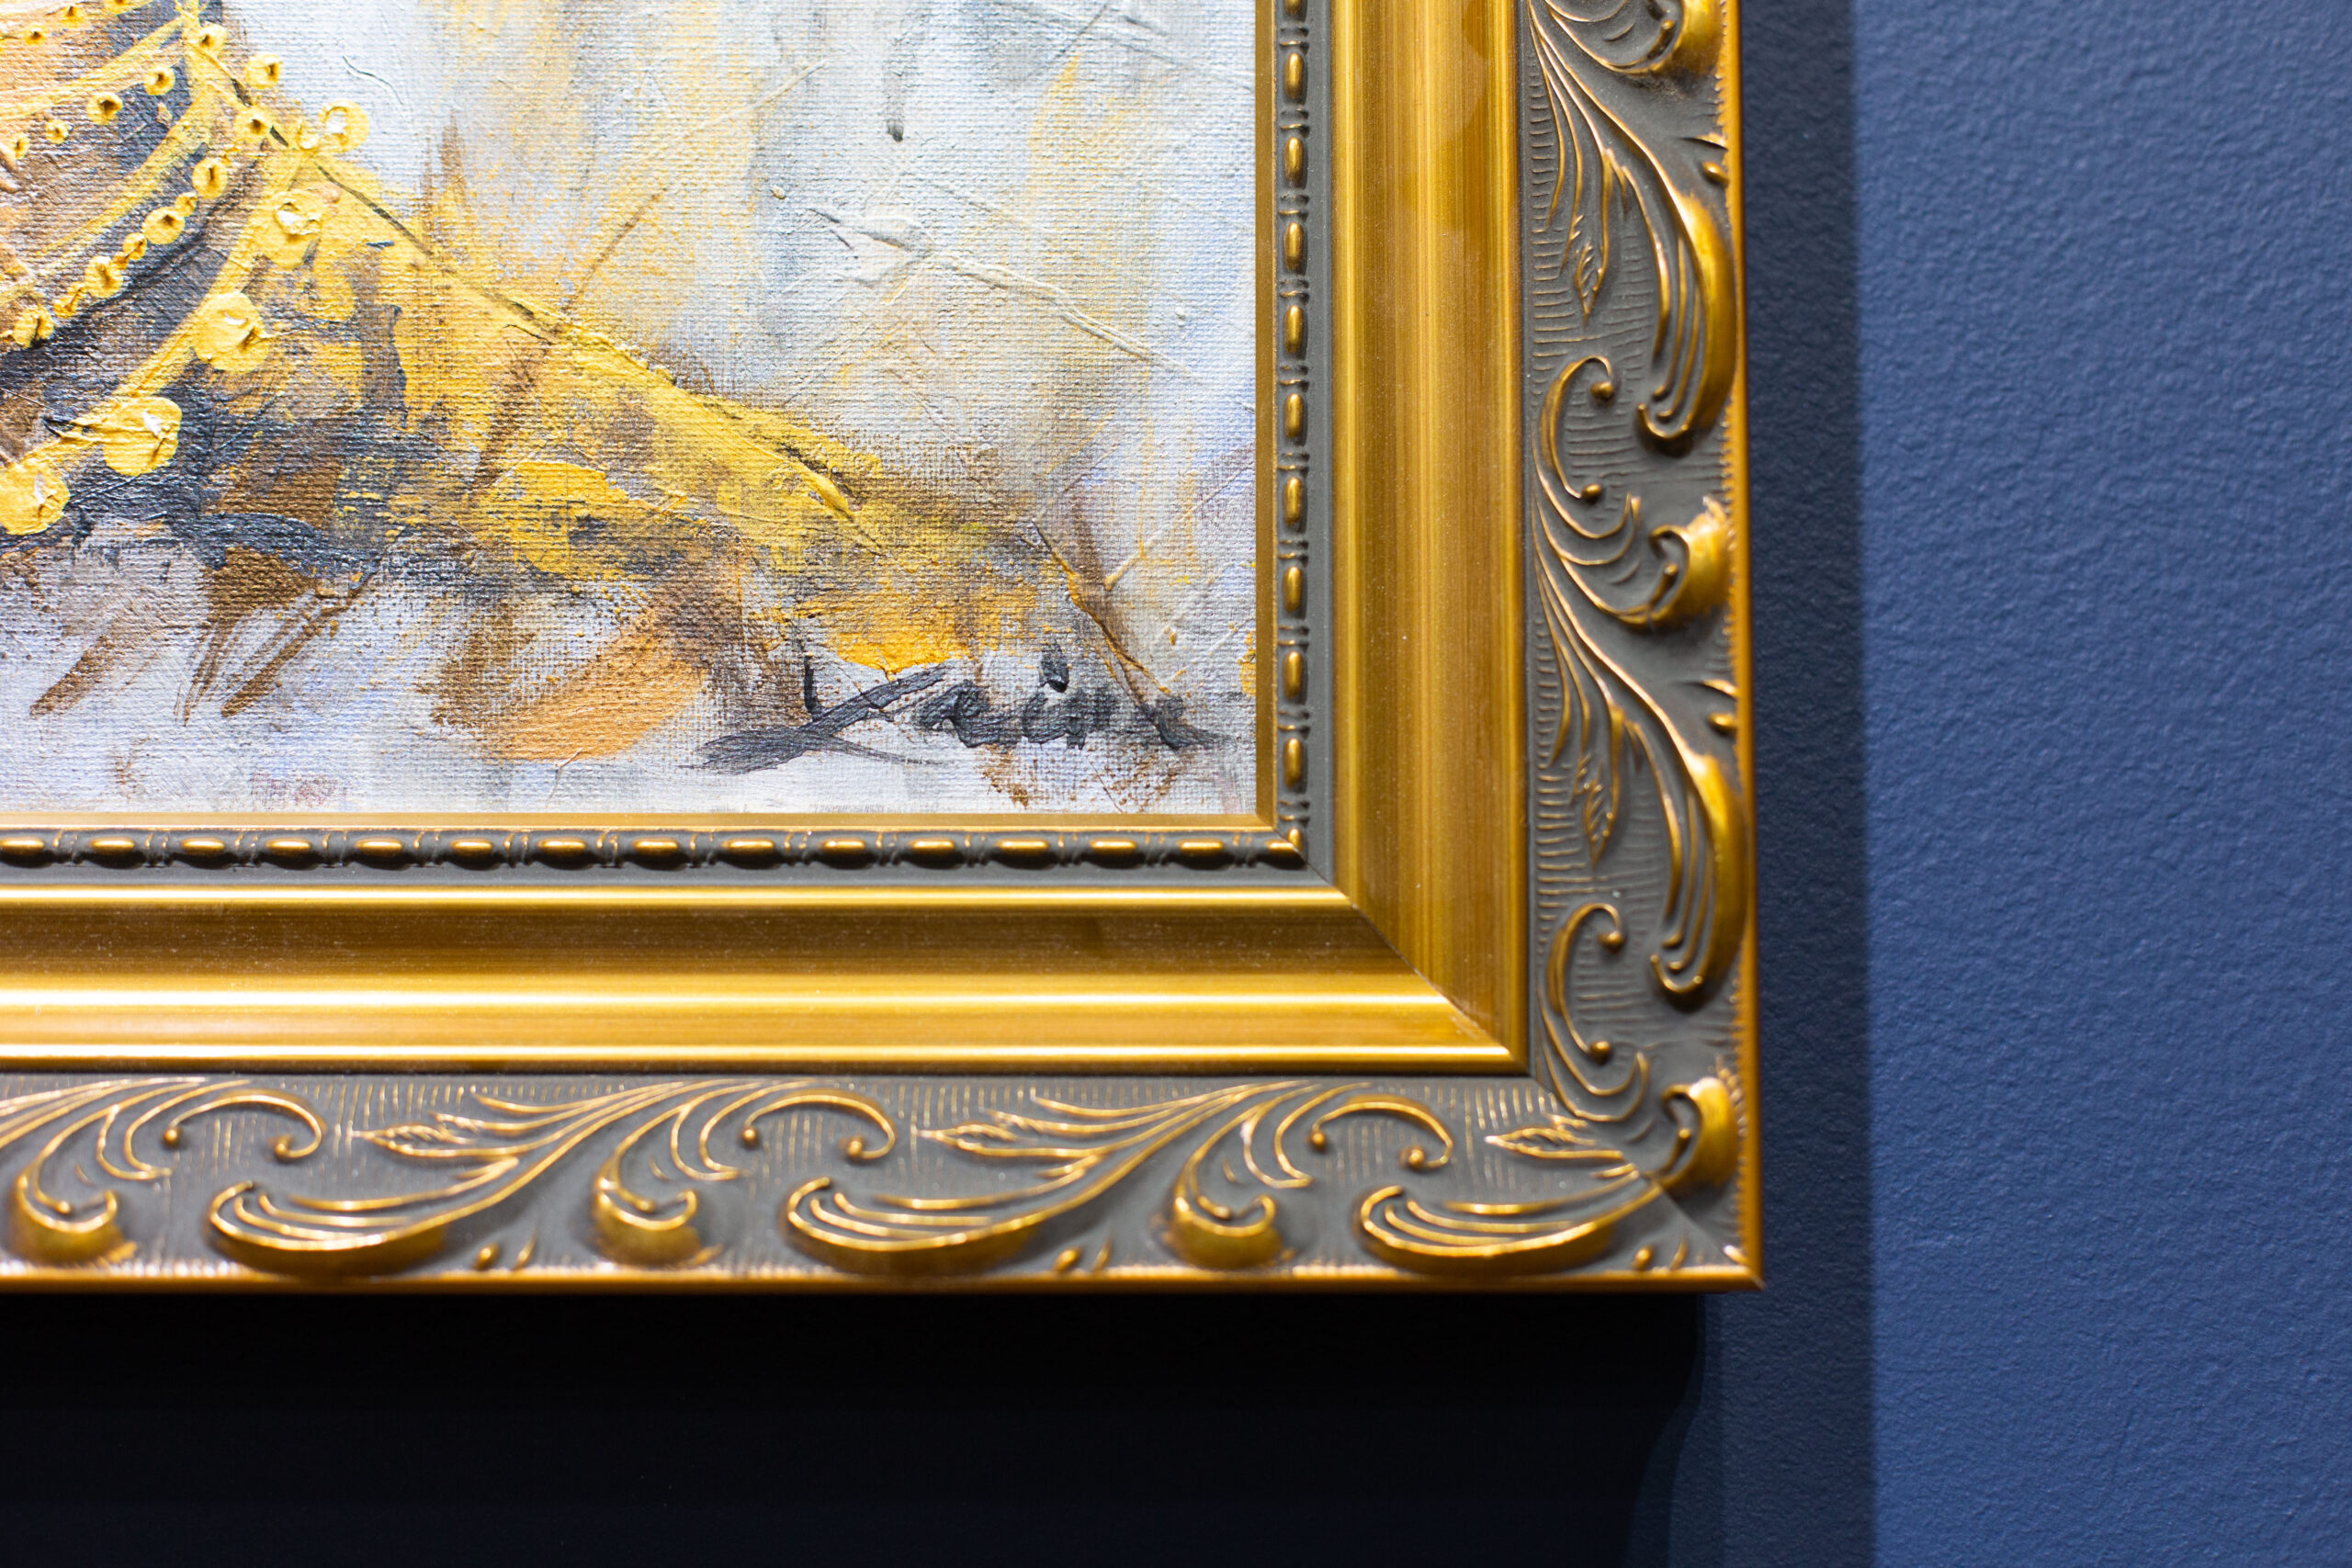 A tight closeup shows the corner of an elegant gold frame with a painting of a woman. The art hangs in the Peterson Picture Co. gallery.